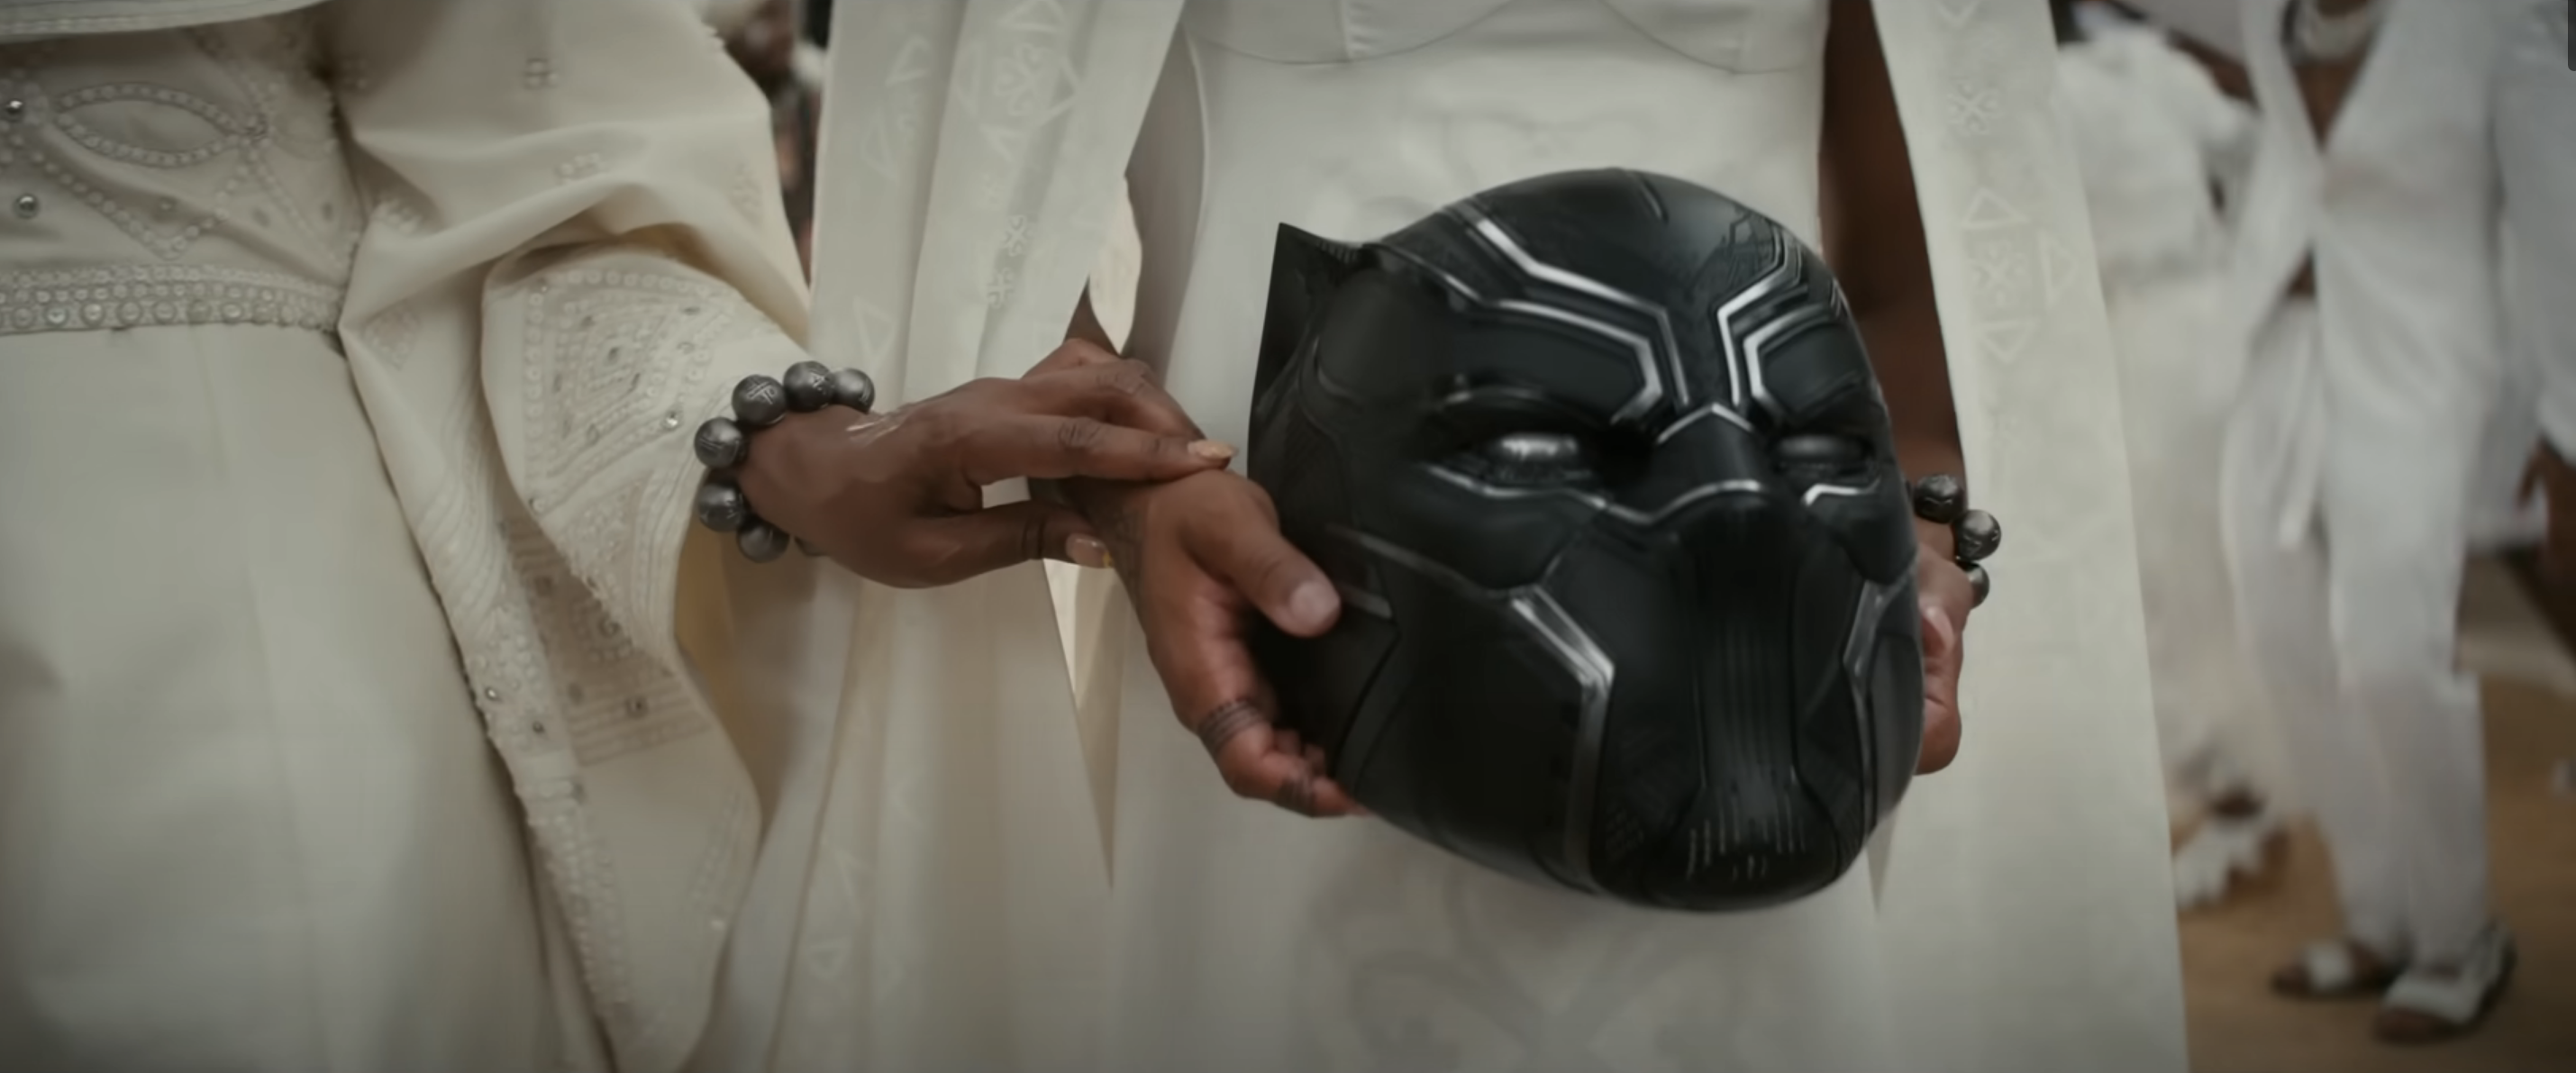 Black Panther 2 streaming on Disney+: spoilers, Easter eggs